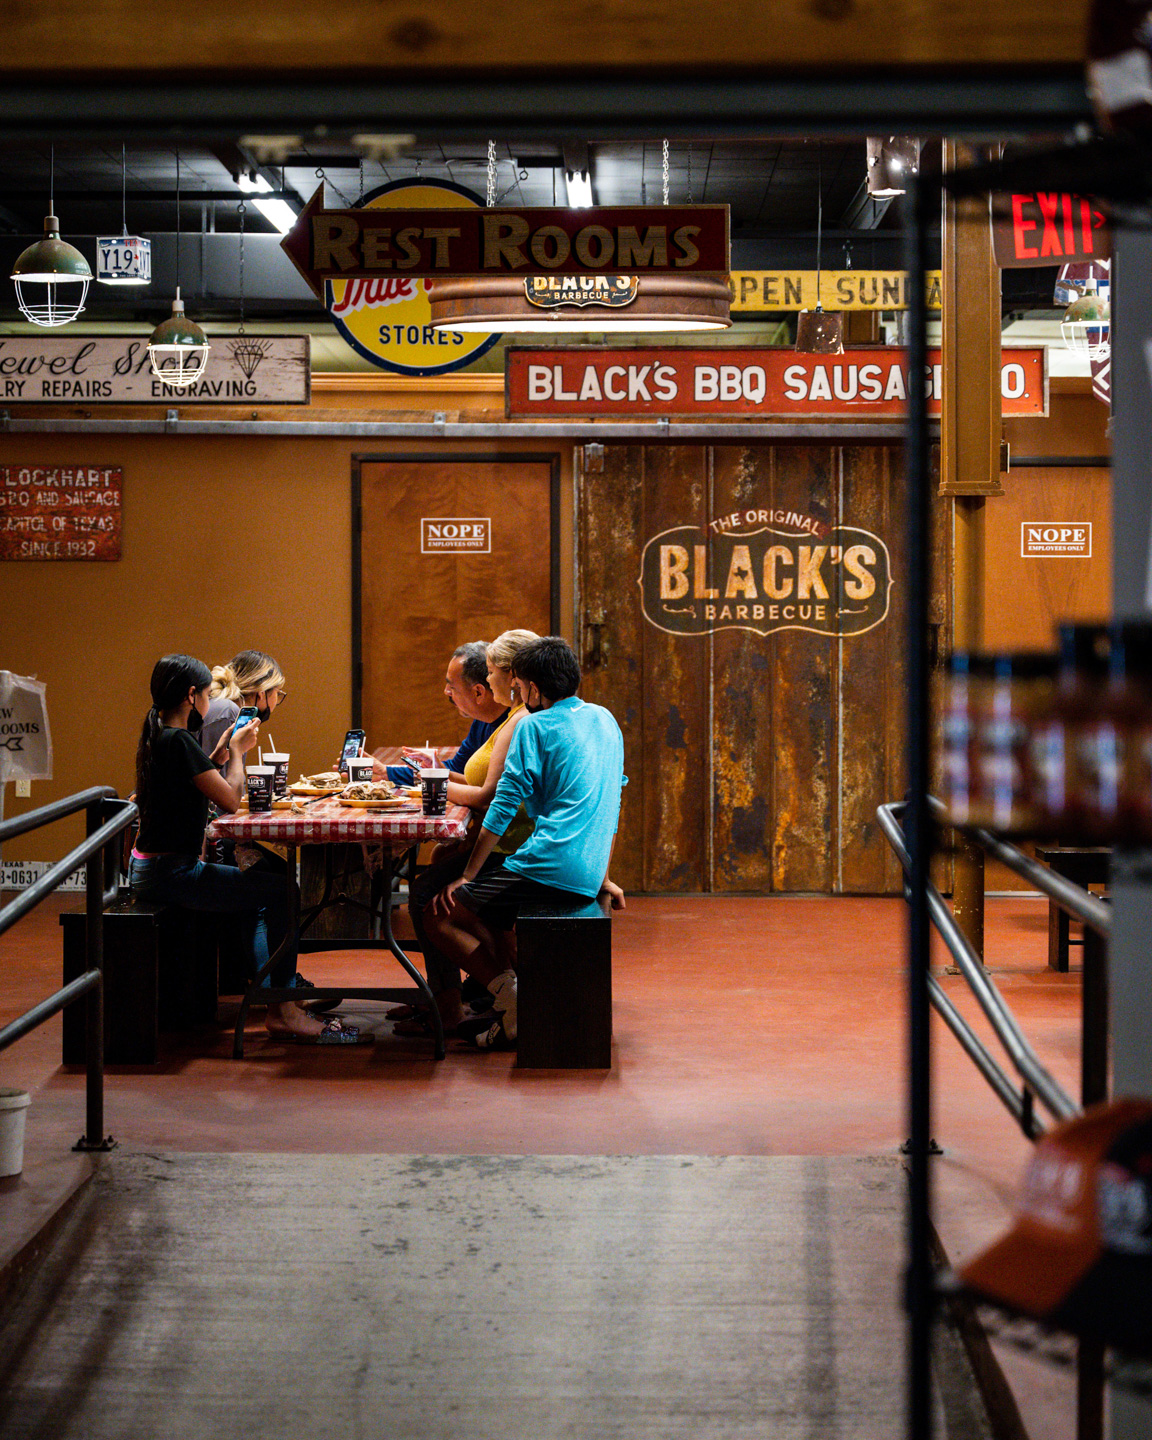 Black's BBQ Employee celebrating with a beer & brisket